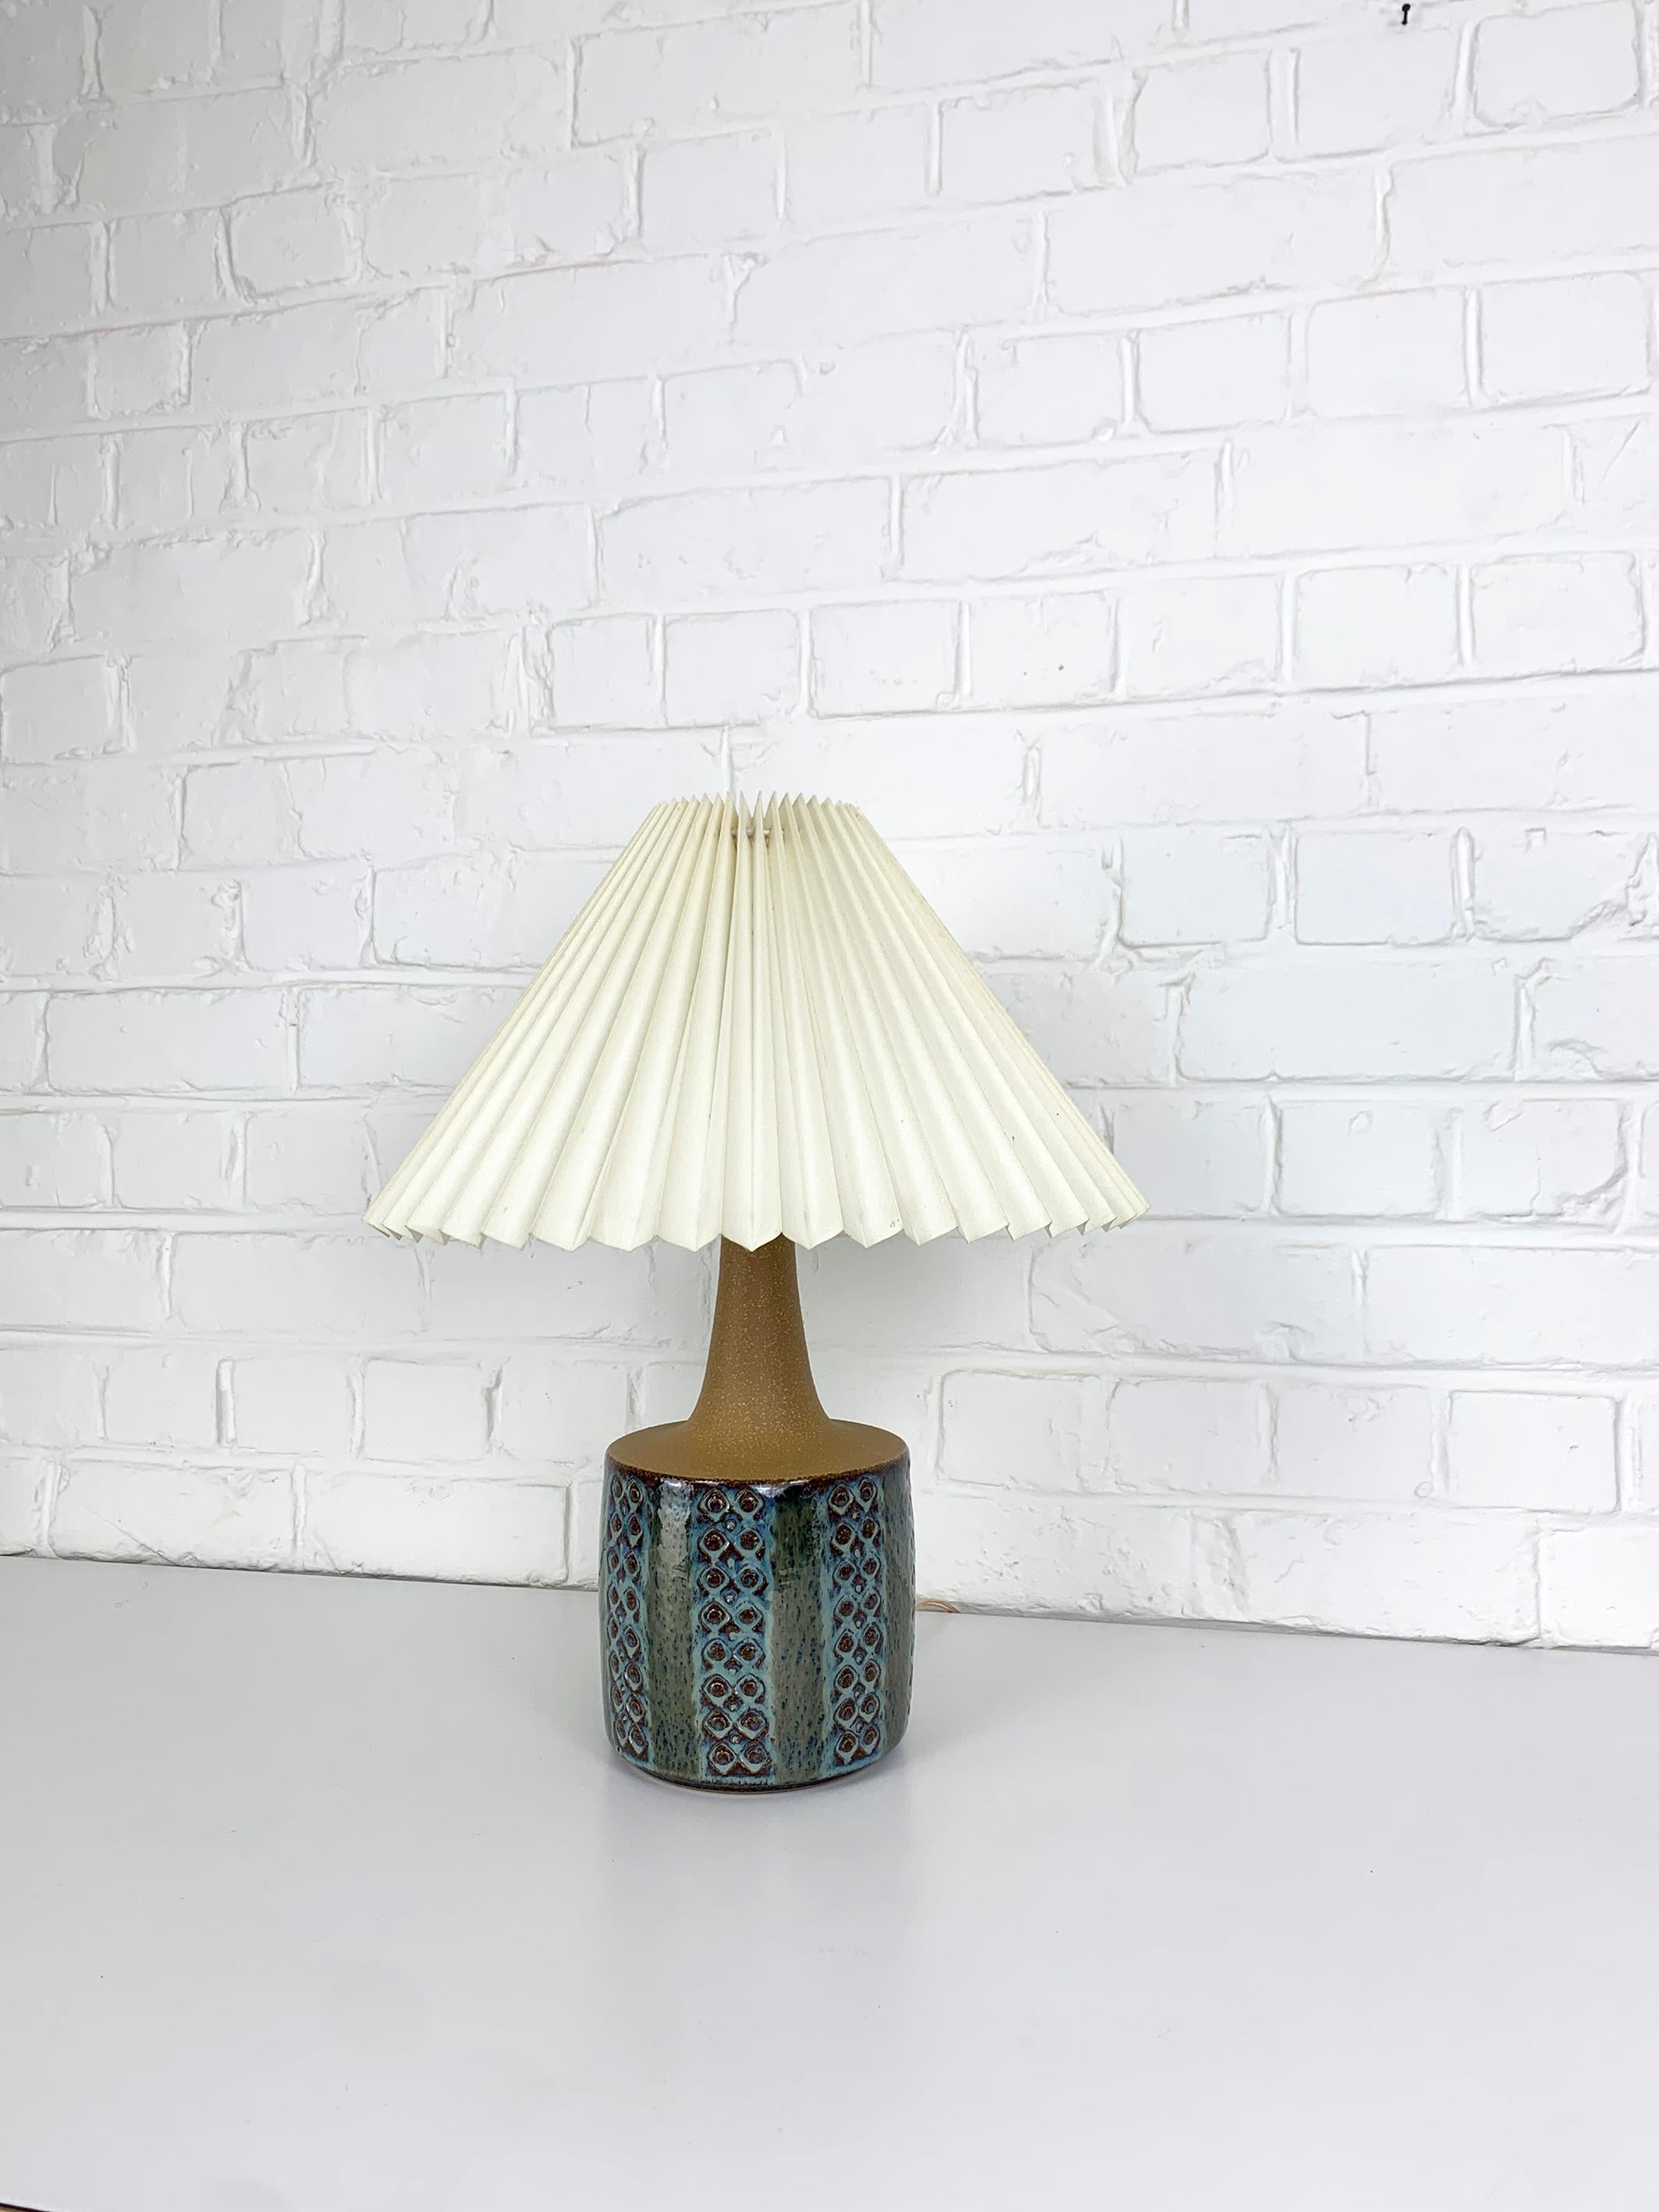 Danish Mid-Century stoneware table lamp of the 1960-70s. Designed by Alex Svendsen. 

Very nice graphic pattern in light blue on a dark blue and green background with brown accents. Deep glaze on the bottom, the top is raw, without